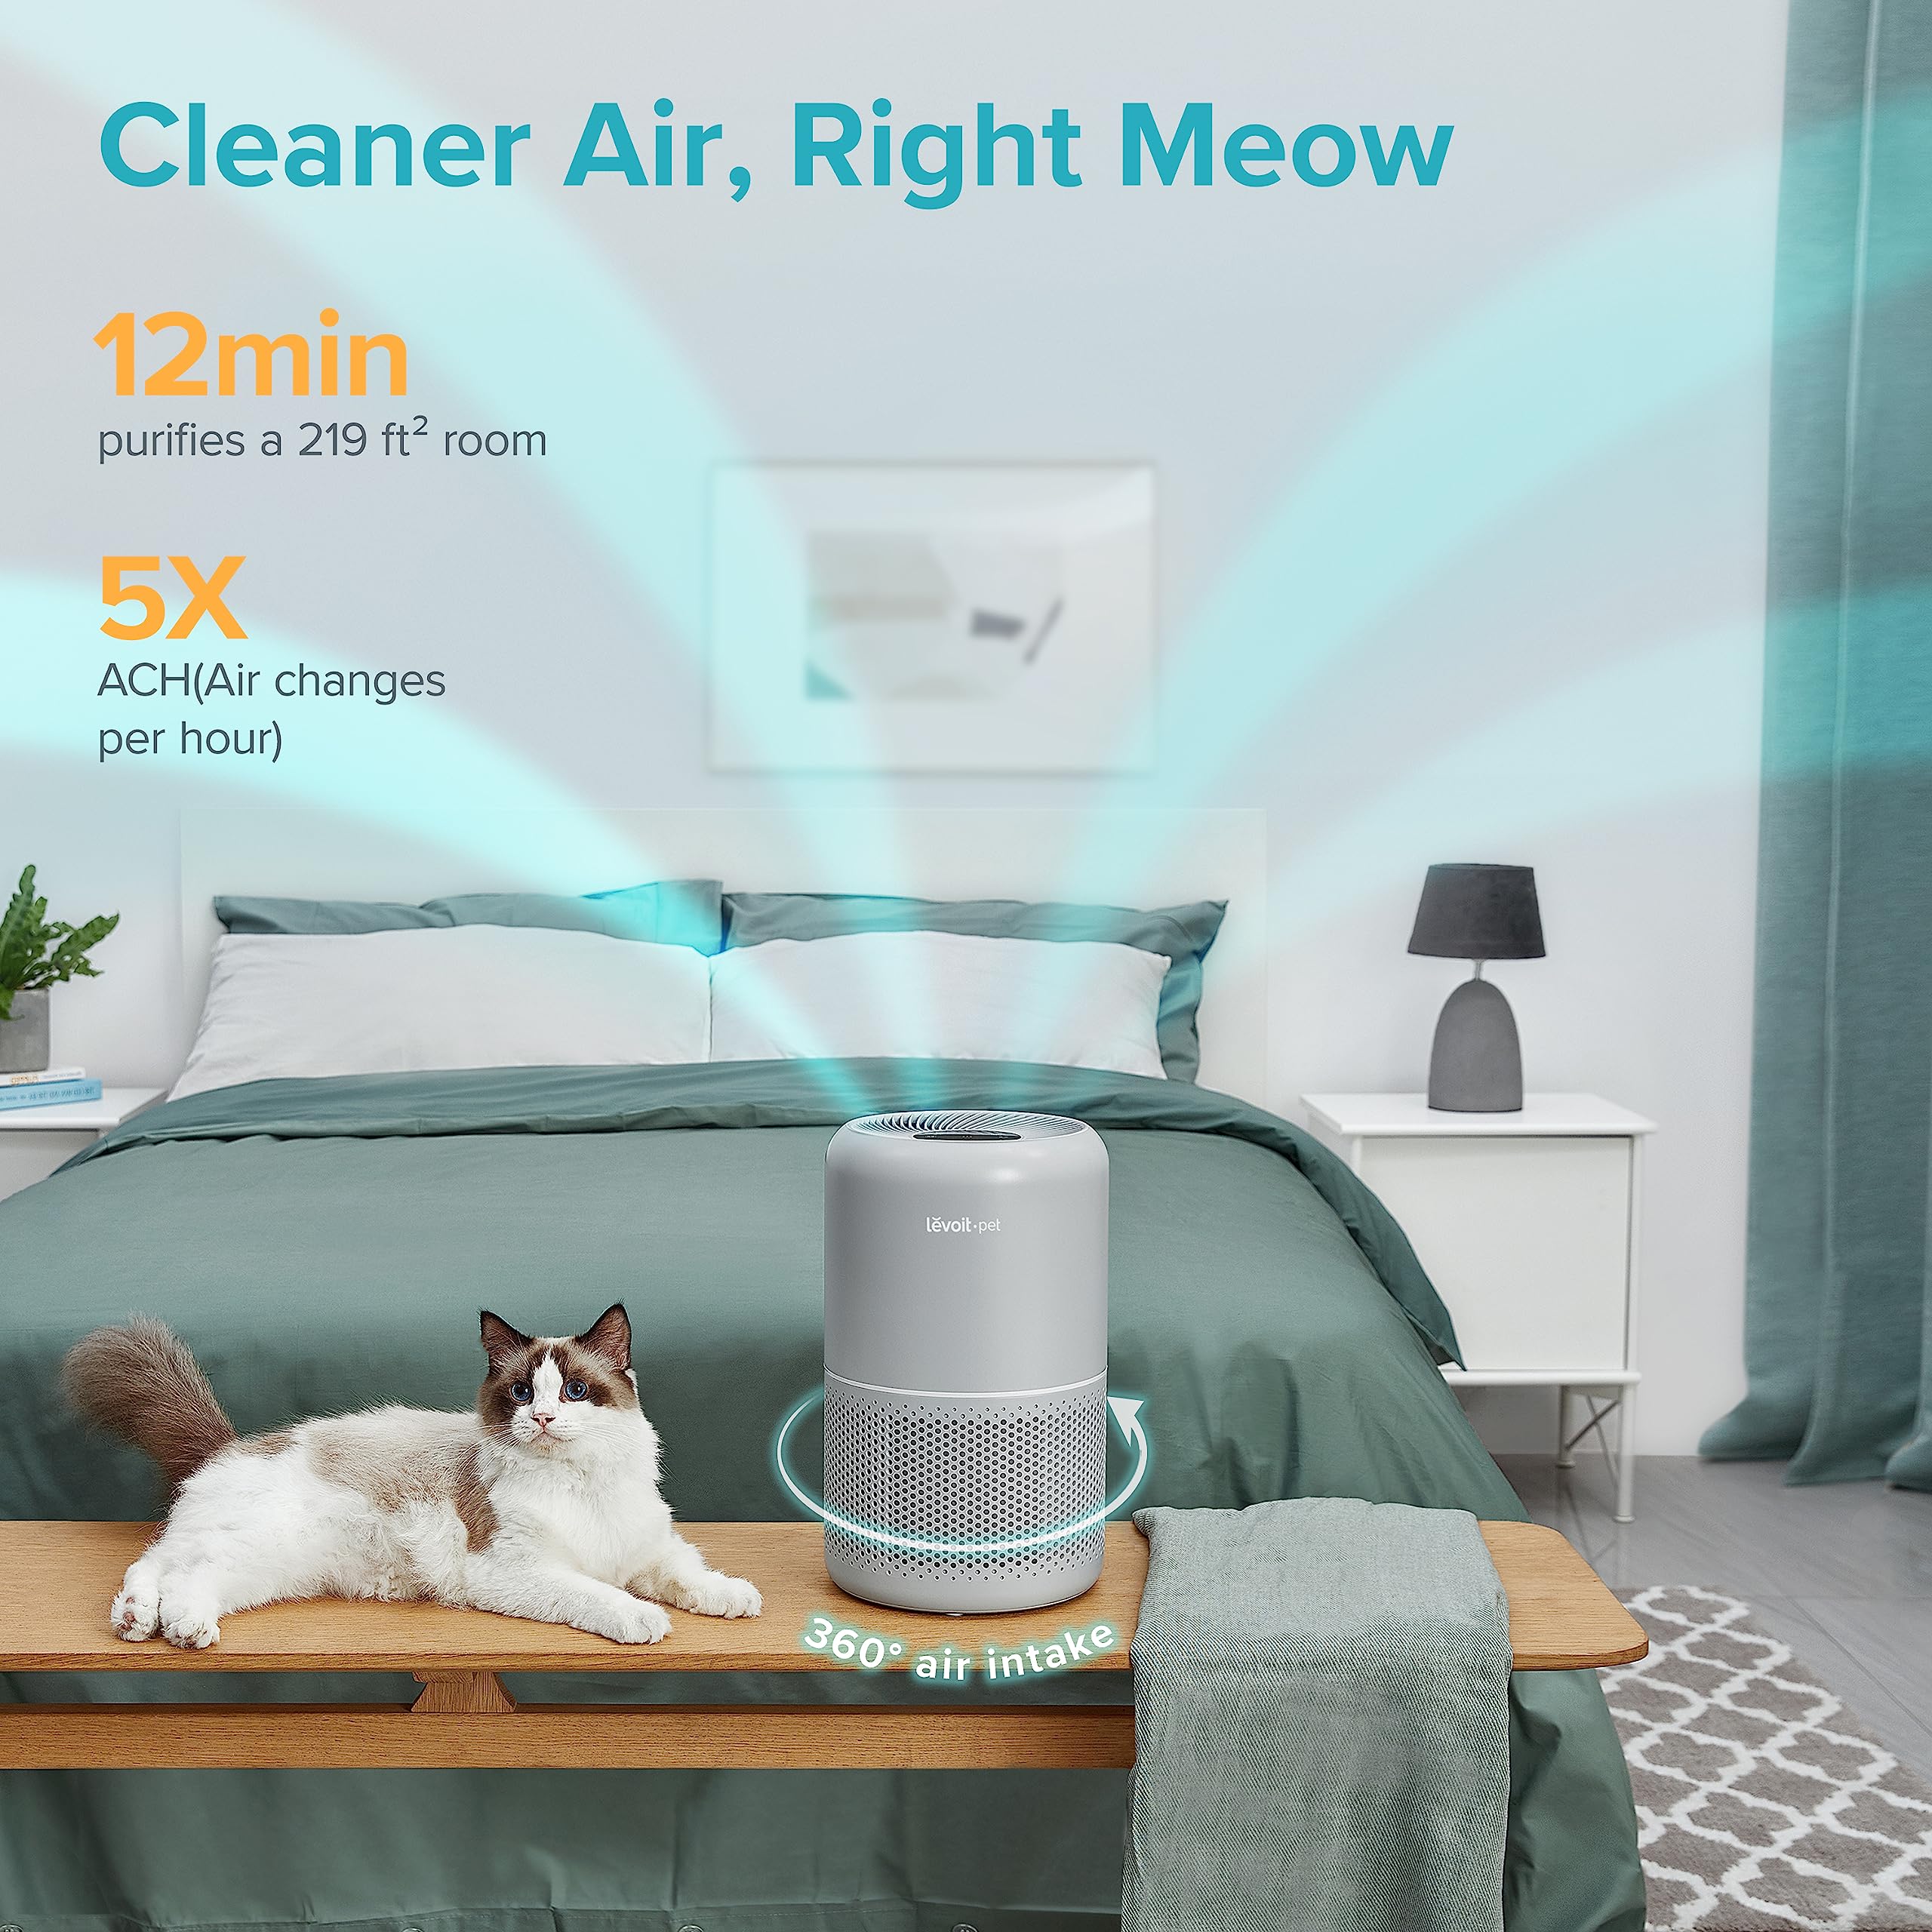 LEVOIT Pet Air Purifiers for Allergies in Home Bedroom, Hepa and Efficient Activated Carbon Filter for Hair Dander Odors, Captures Smoke, Dust, Mold, Pollen, Pet Lock, Sleep Mode, Core P350, Grey